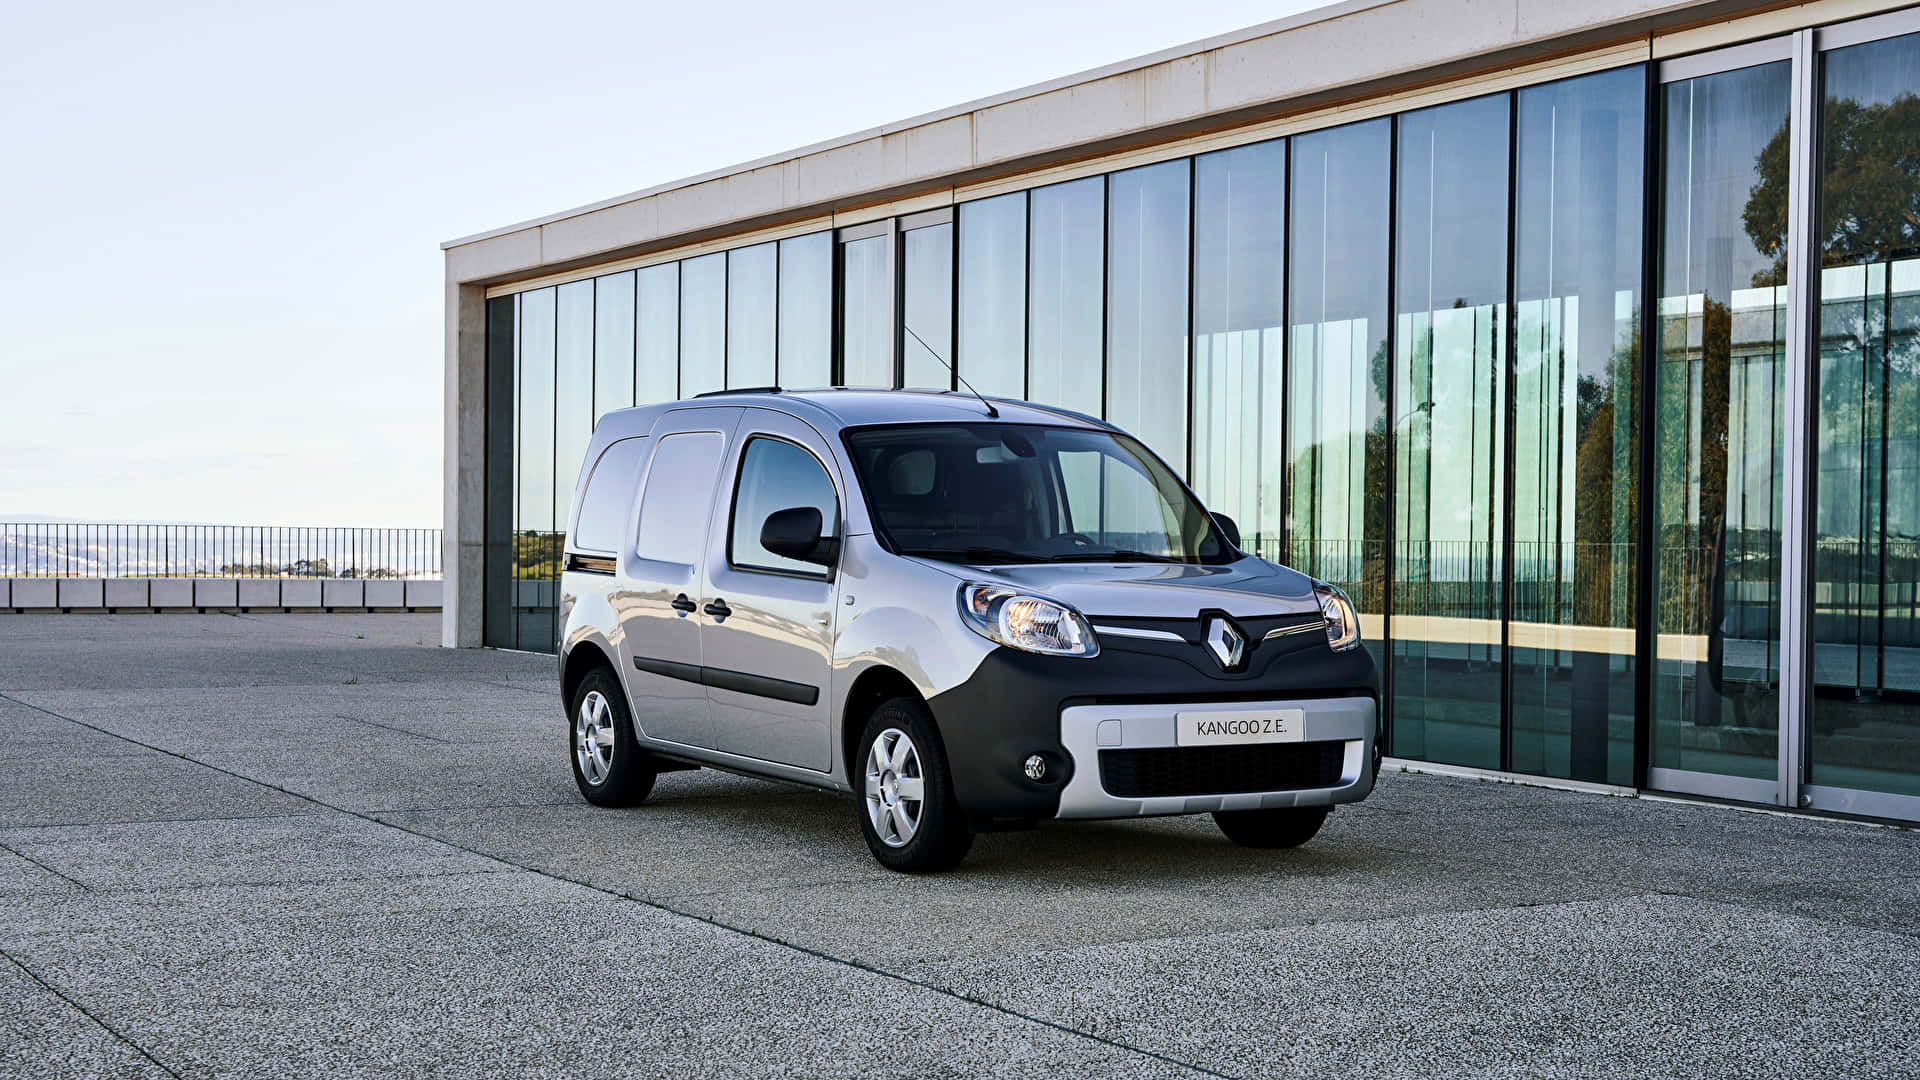 Stylish Renault Kangoo parked in picturesque nature Wallpaper